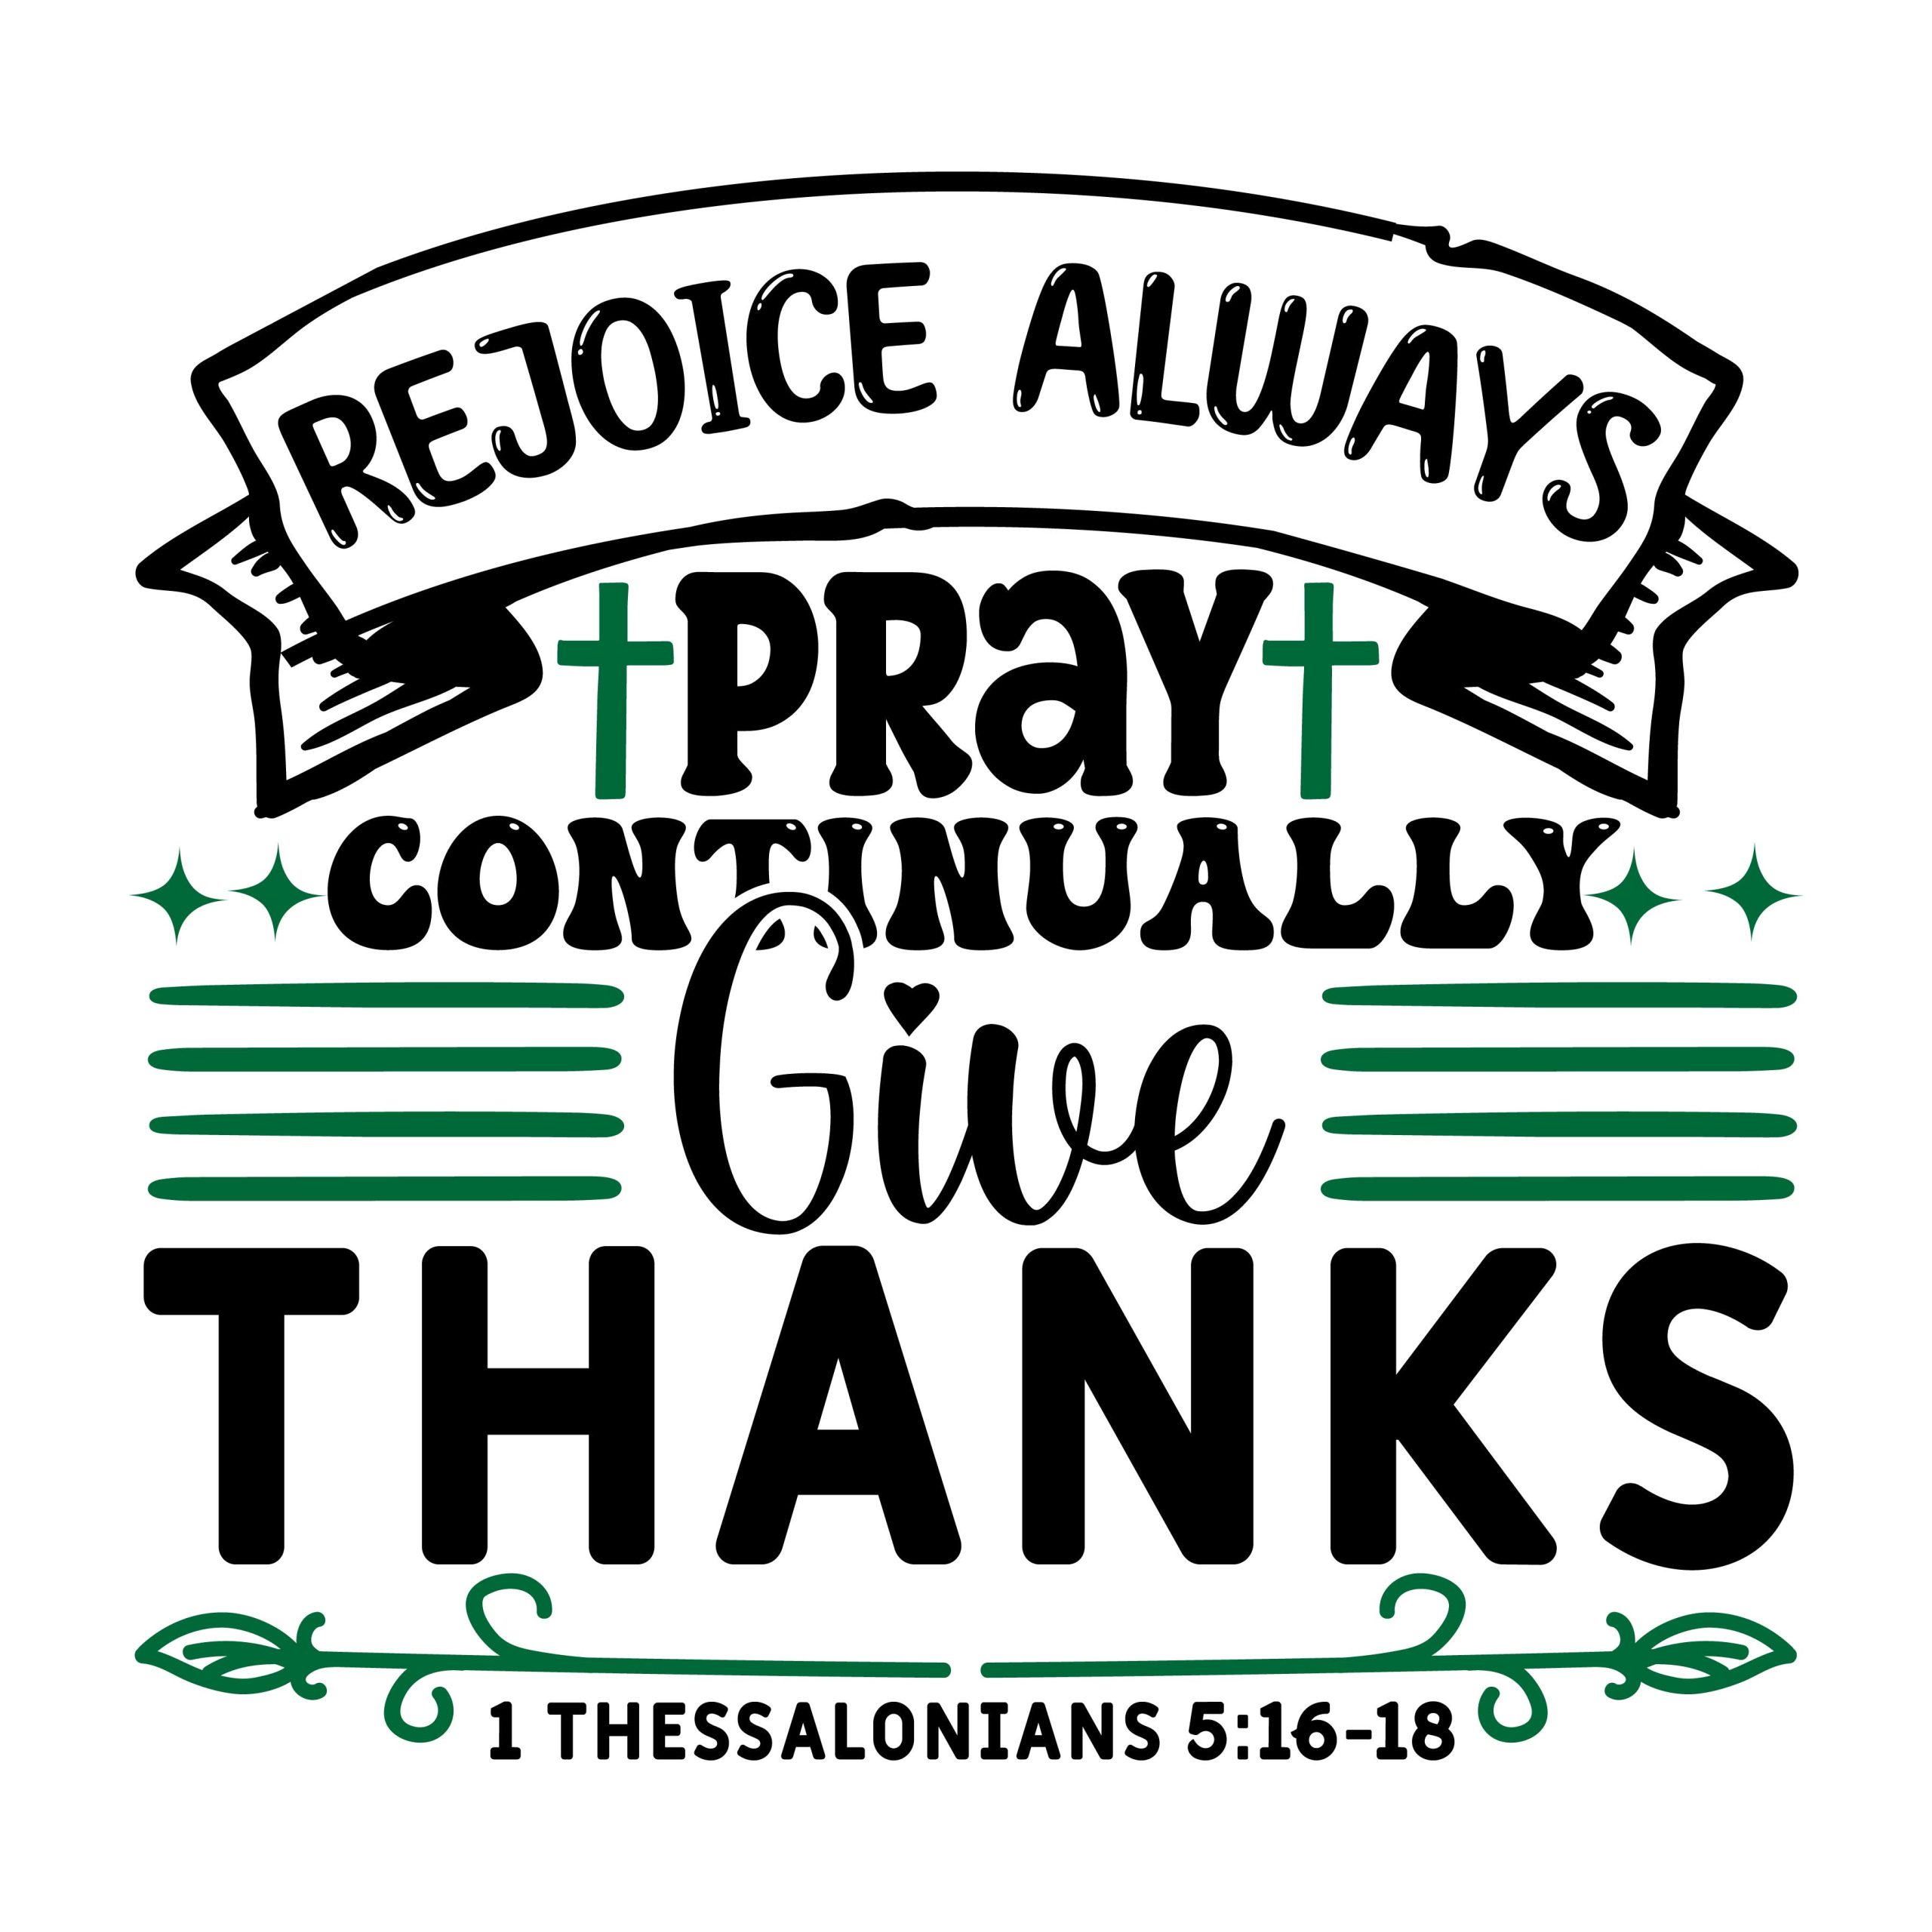 Rejoice always pray continually give thanks 1 Thessalonians 5:16-18, bible verses, scripture verses, svg files, passages, sayings, cricut designs, silhouette, embroidery, bundle, free cut files, design space, vector